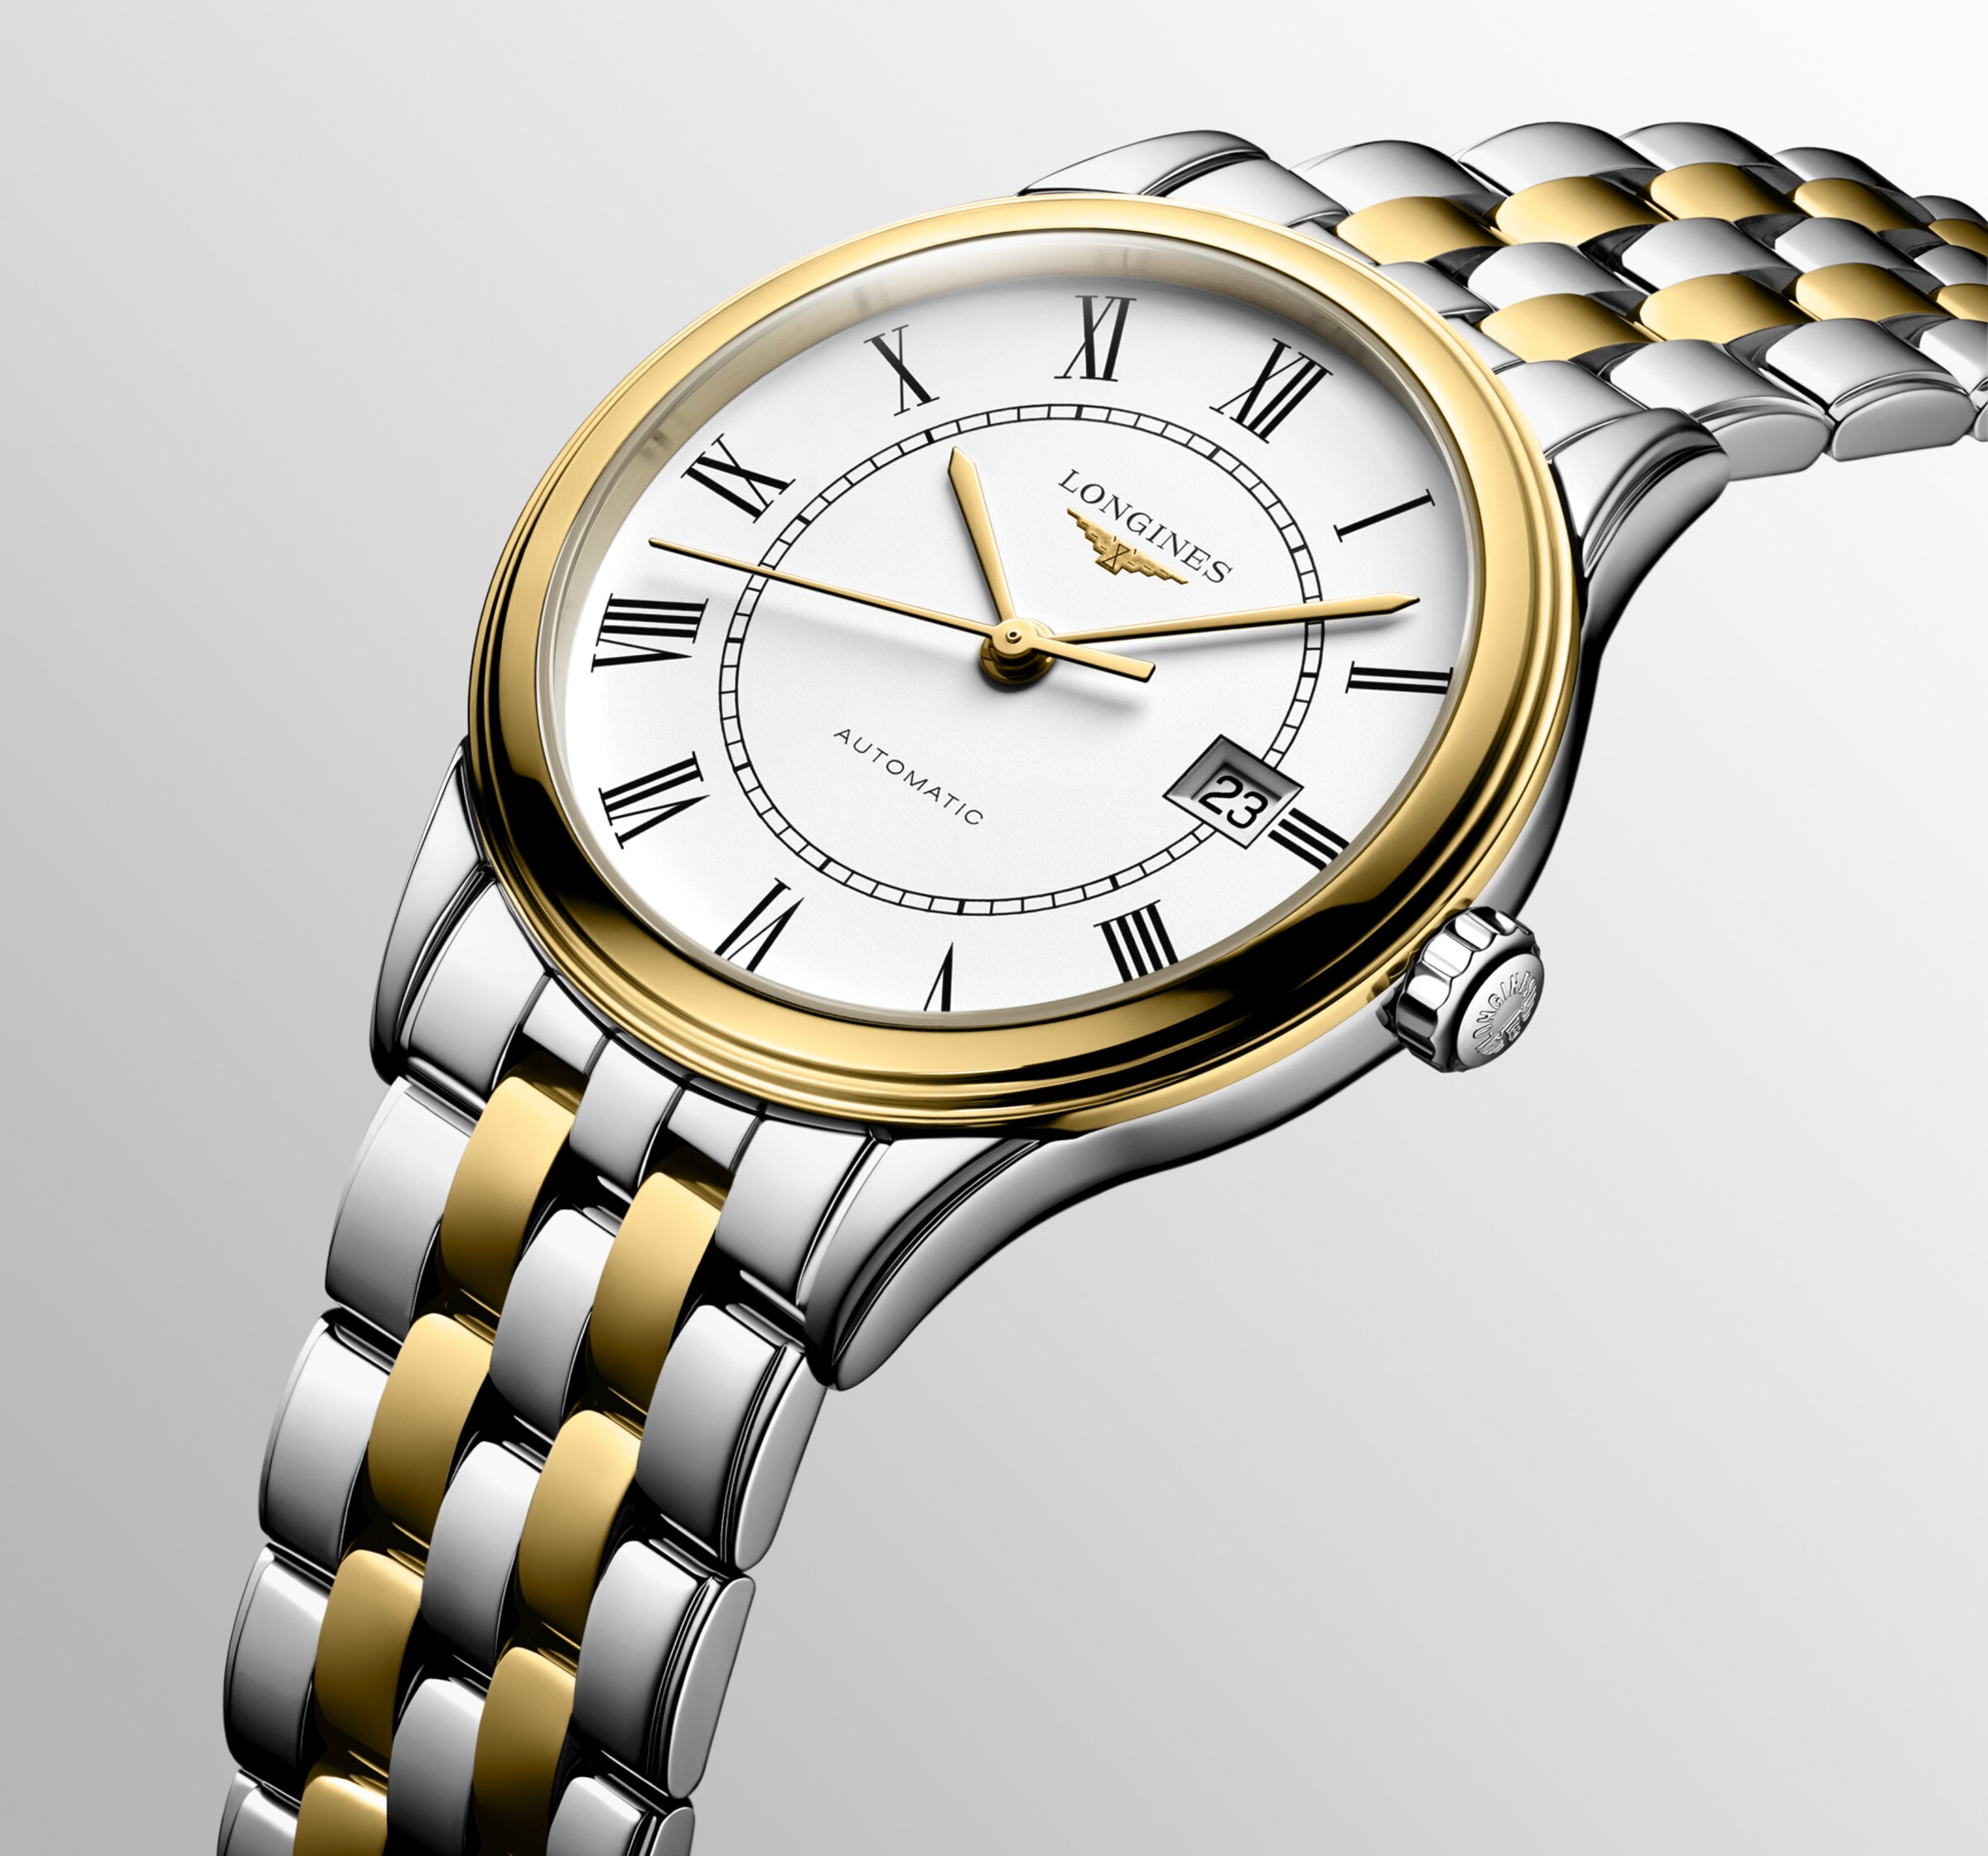 Longines FLAGSHIP Automatic Stainless steel and yellow PVD coating Watch - L4.374.3.21.7